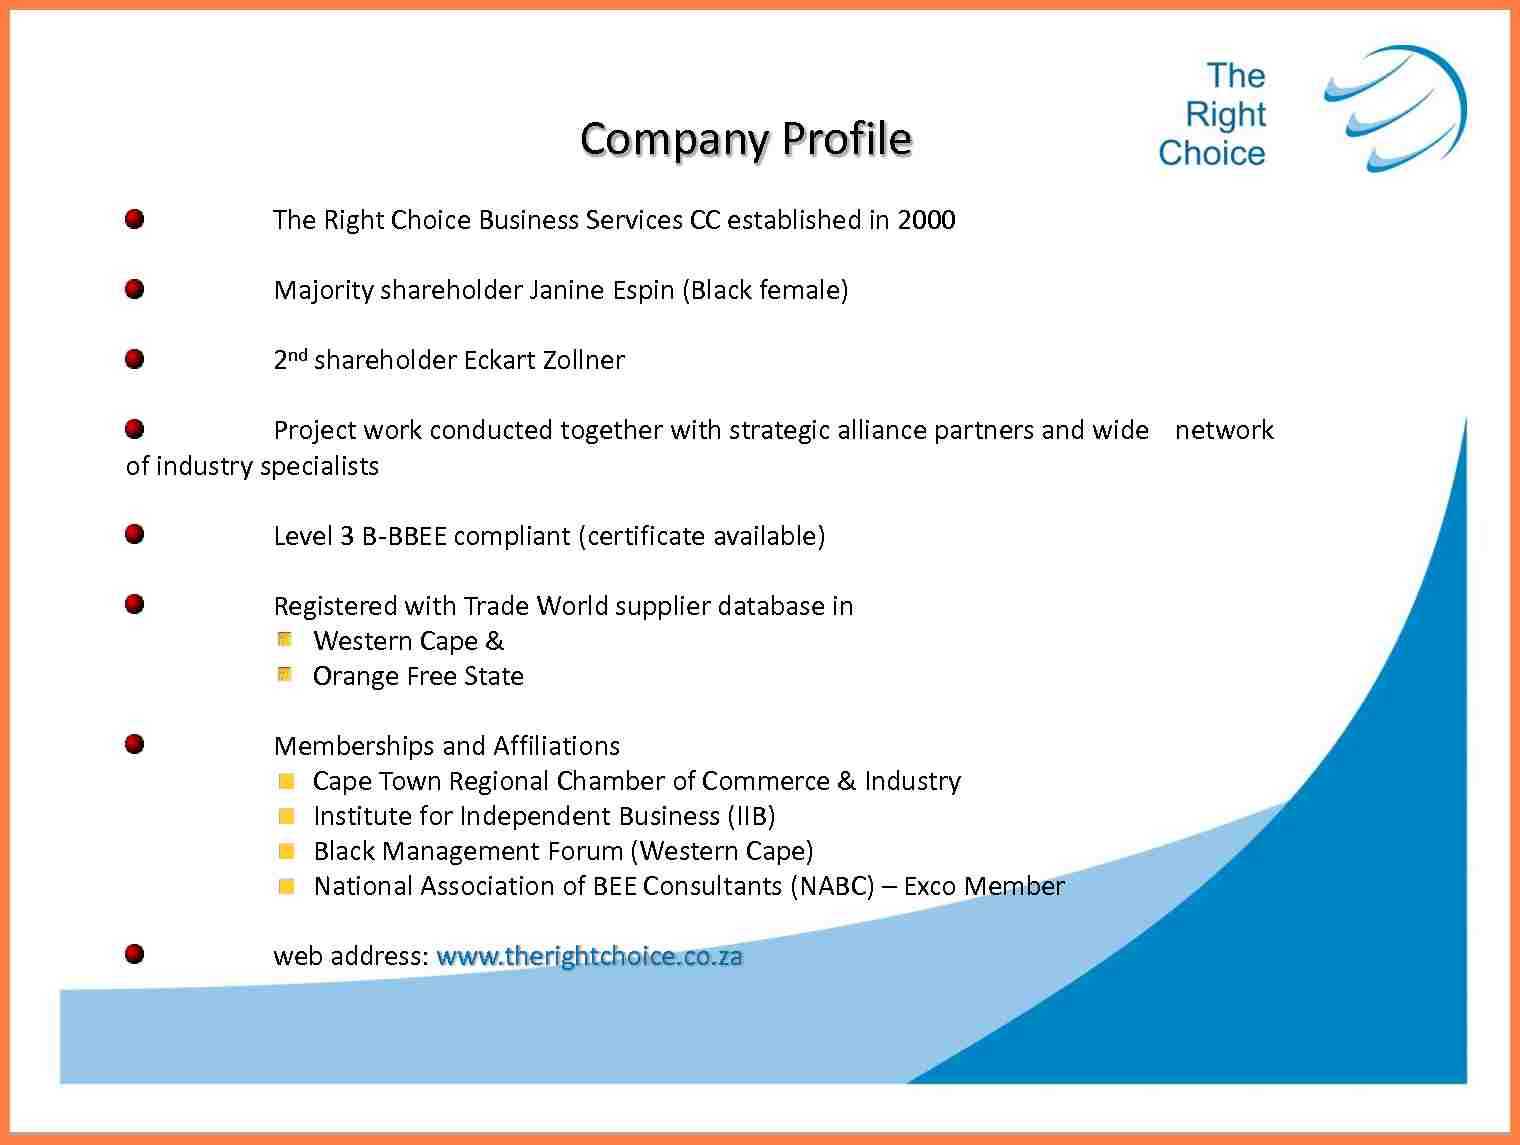 Company Profile Sample For Printing Business | Functional Pertaining To Company Profile Template For Small Business